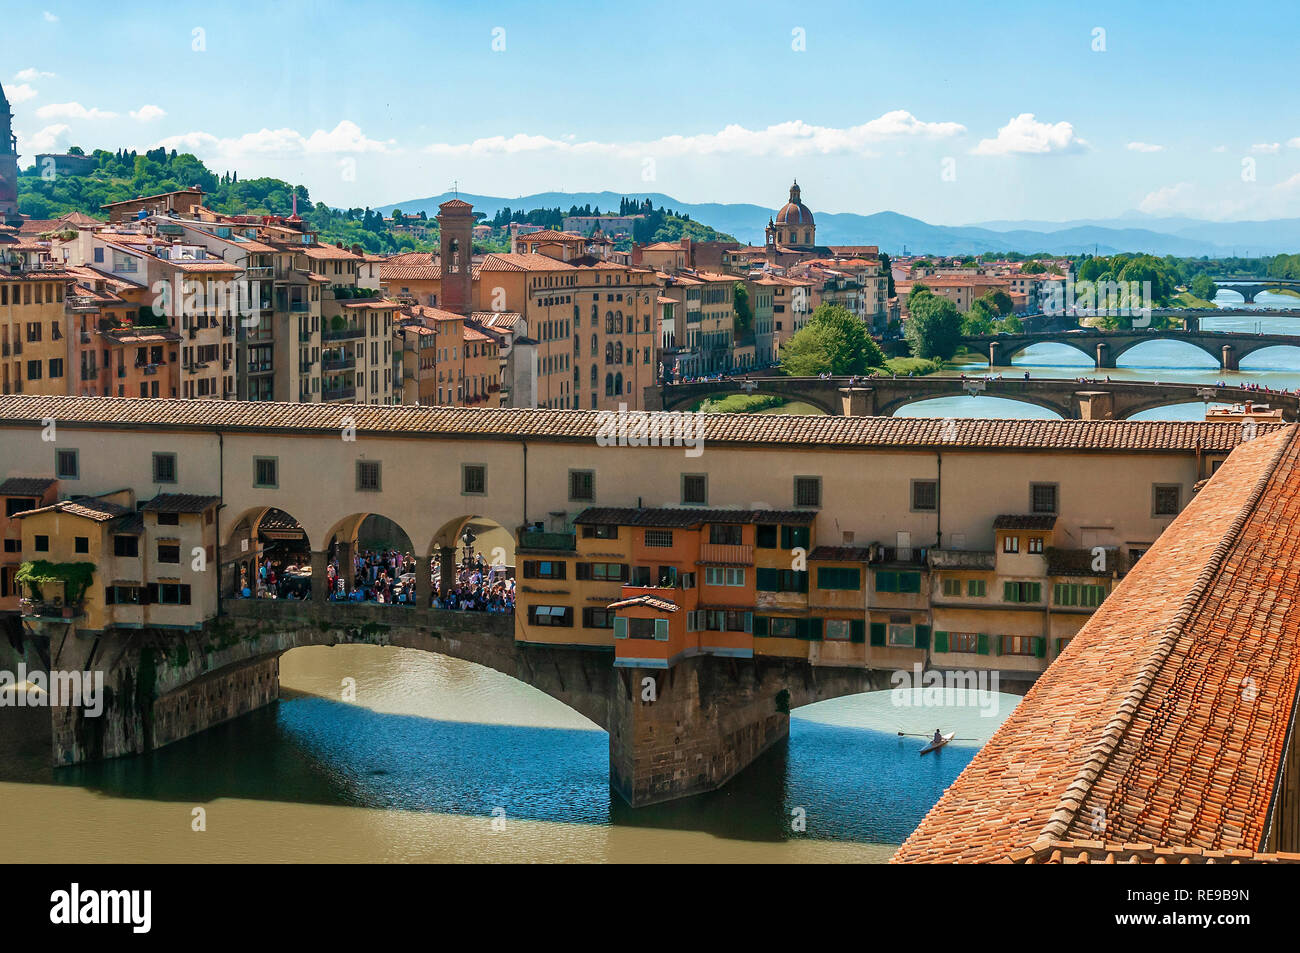 View of the Ponte Vecchio, a medieval stone bridge over the River Arno with other bridges in the background in the centre of Florence, Italy Stock Photo